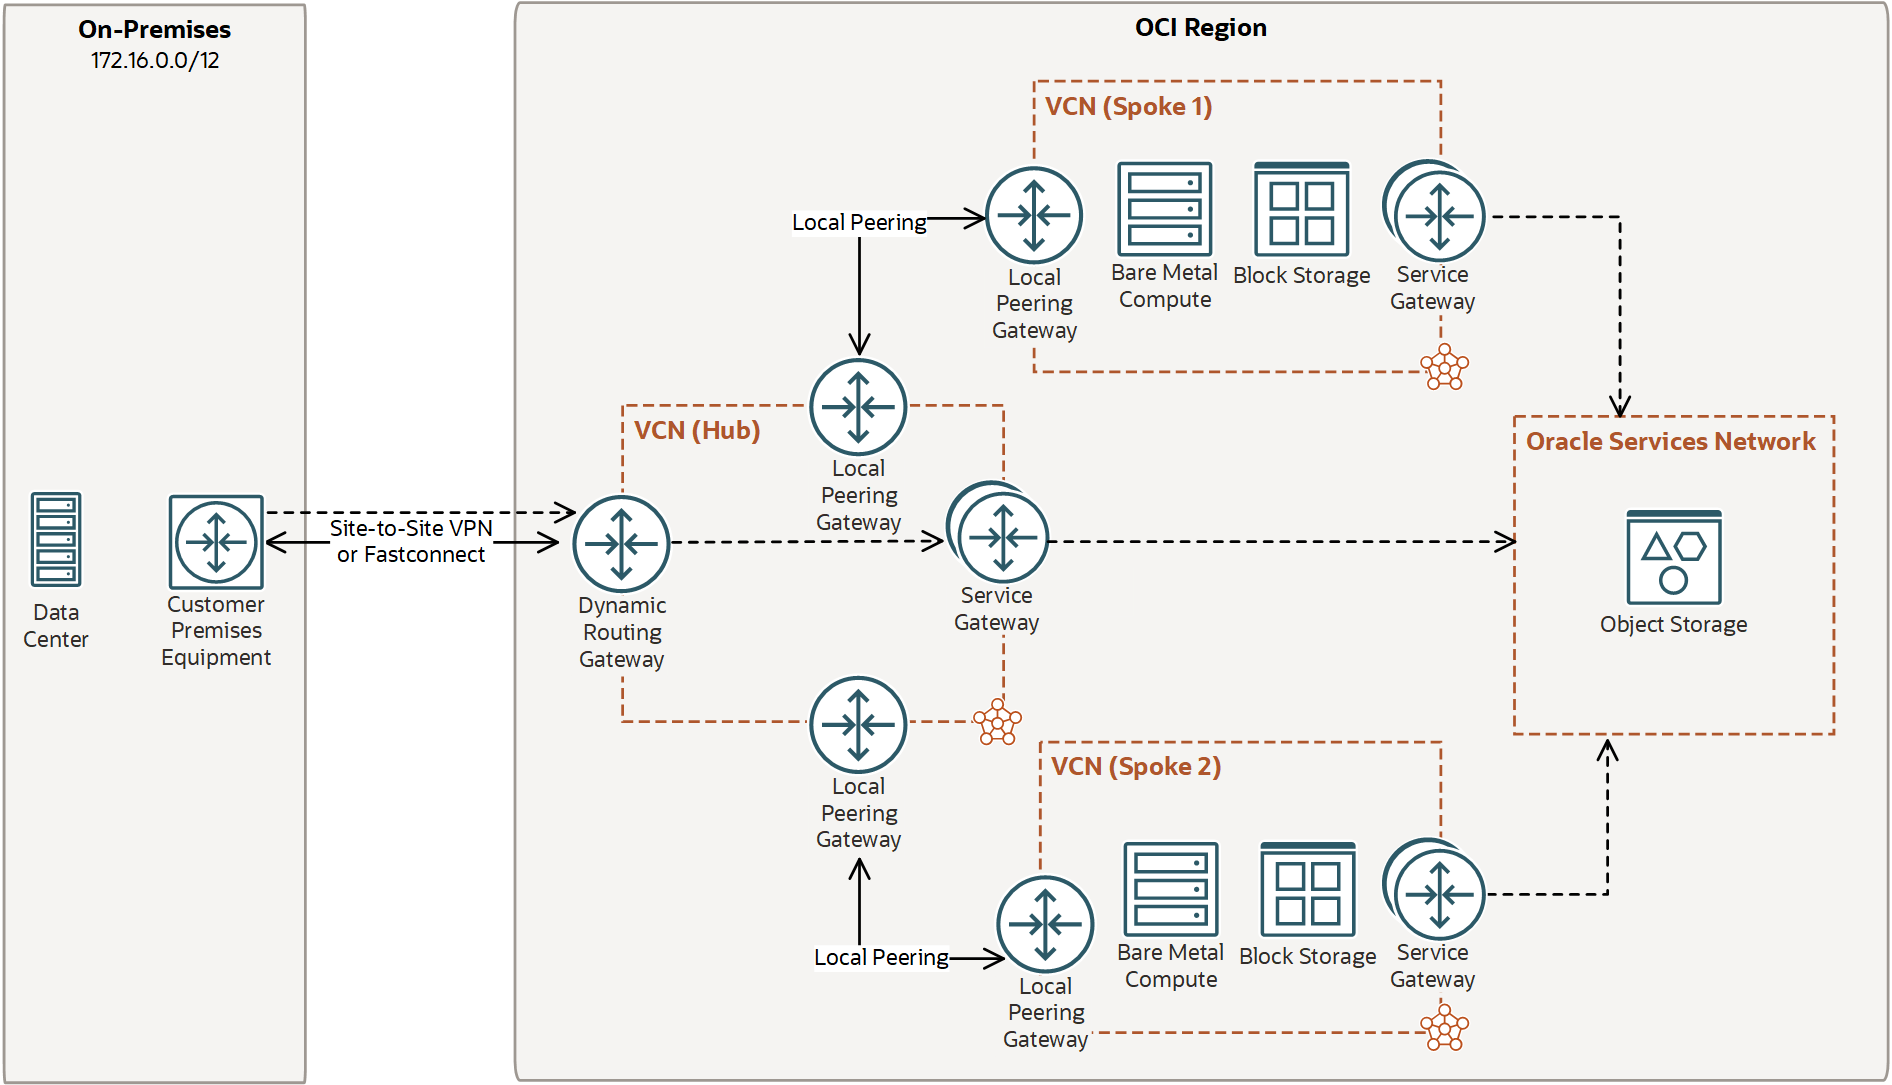 This image shows the on-premises network connected to a single DRG.